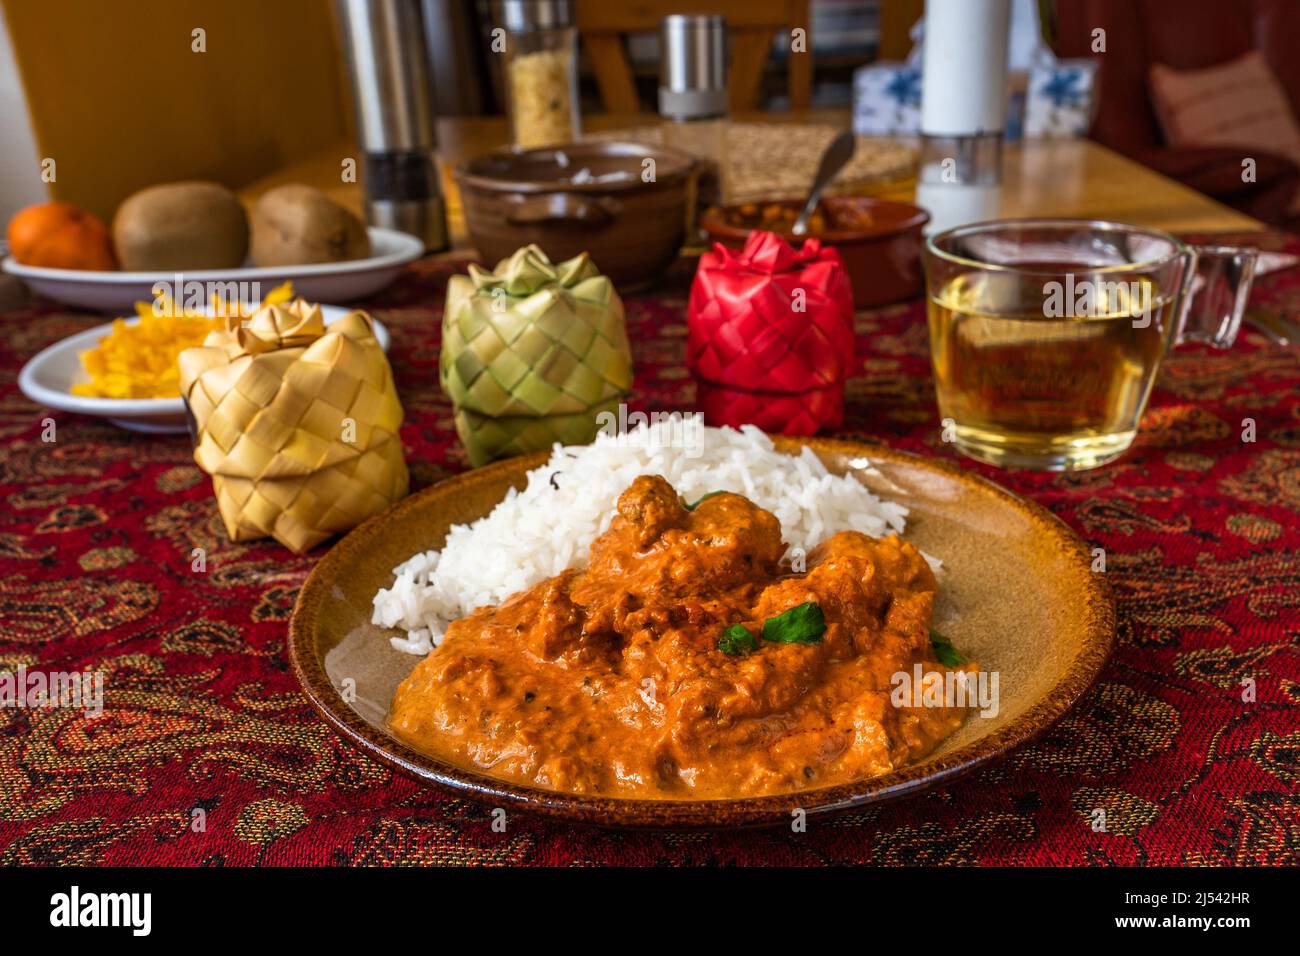 Spicy indian chicken tikka masala with rice on plate, 3 bamboo spice box, cup of tea, fruit on red table-cloth on table. Stock Photo